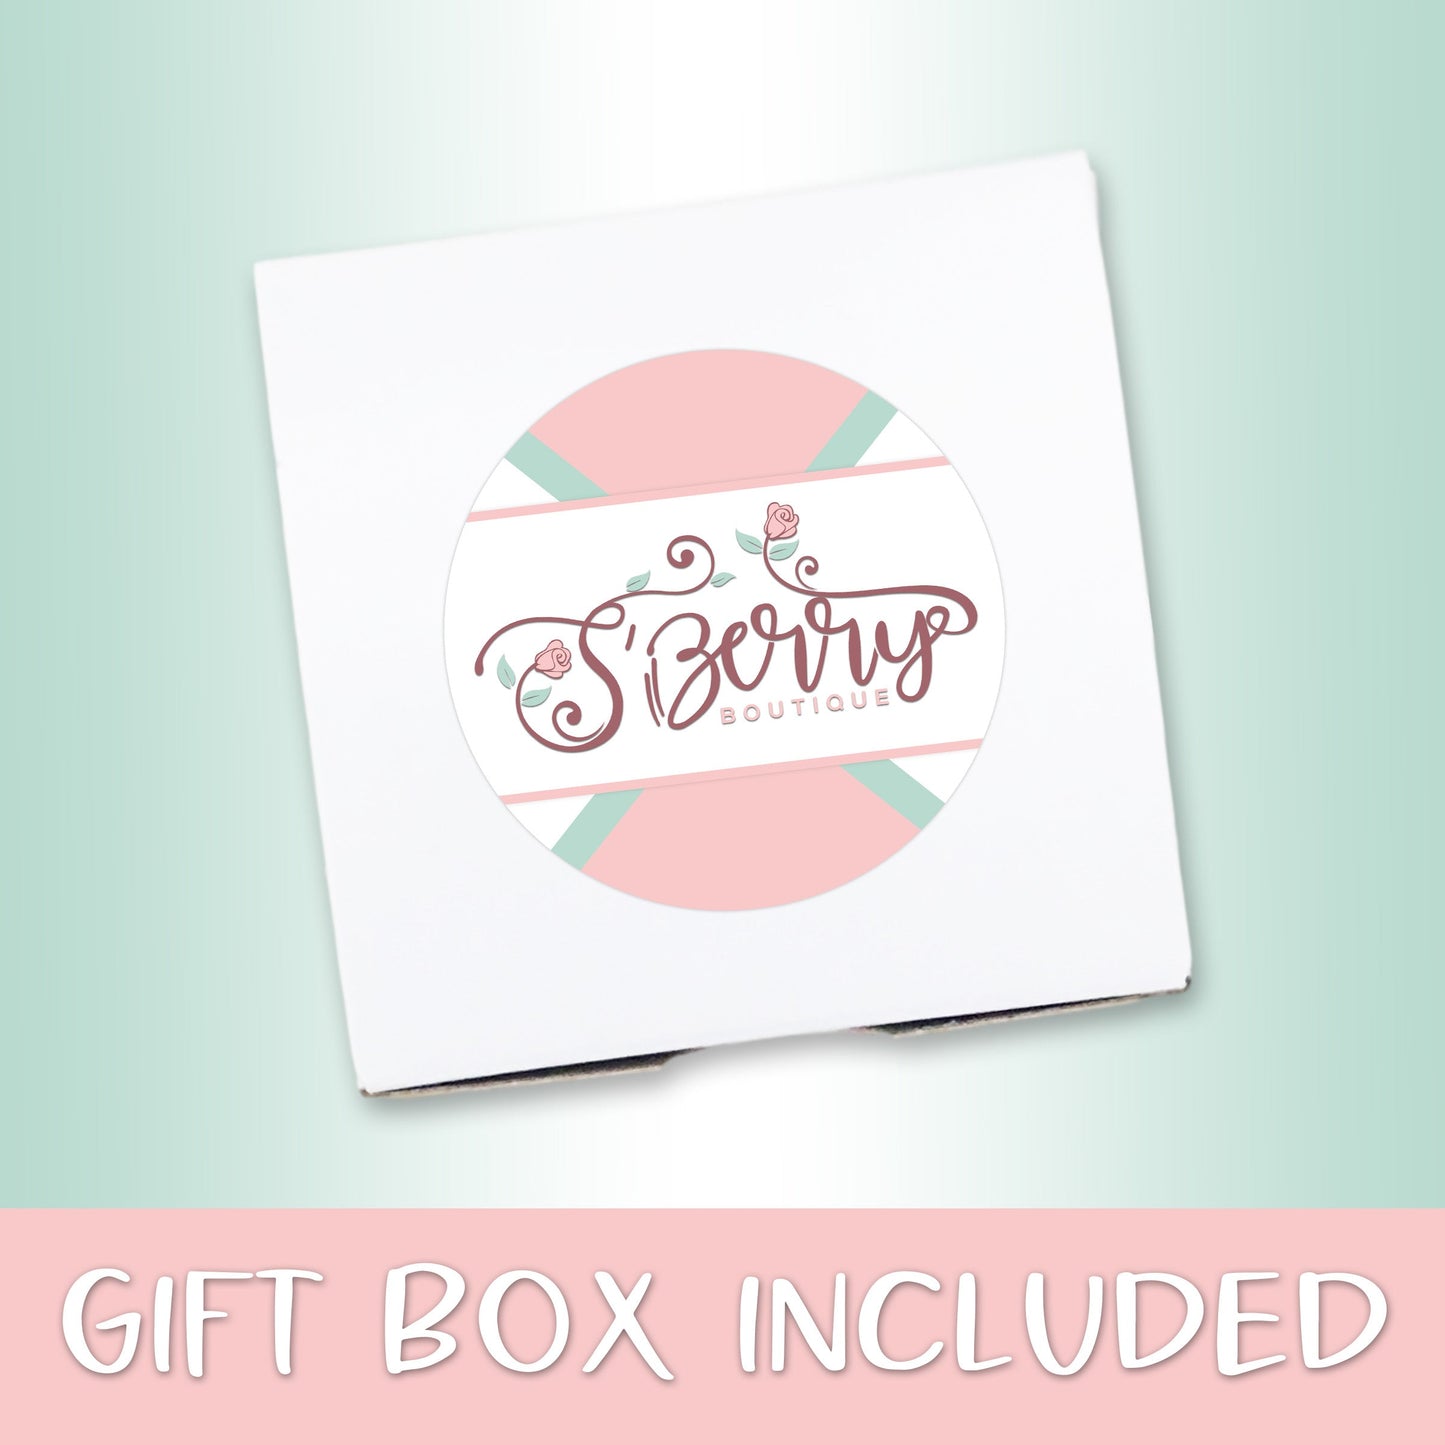 Create Your Own Puzzle - Floral Design - CYOP0101 | S'Berry Boutique